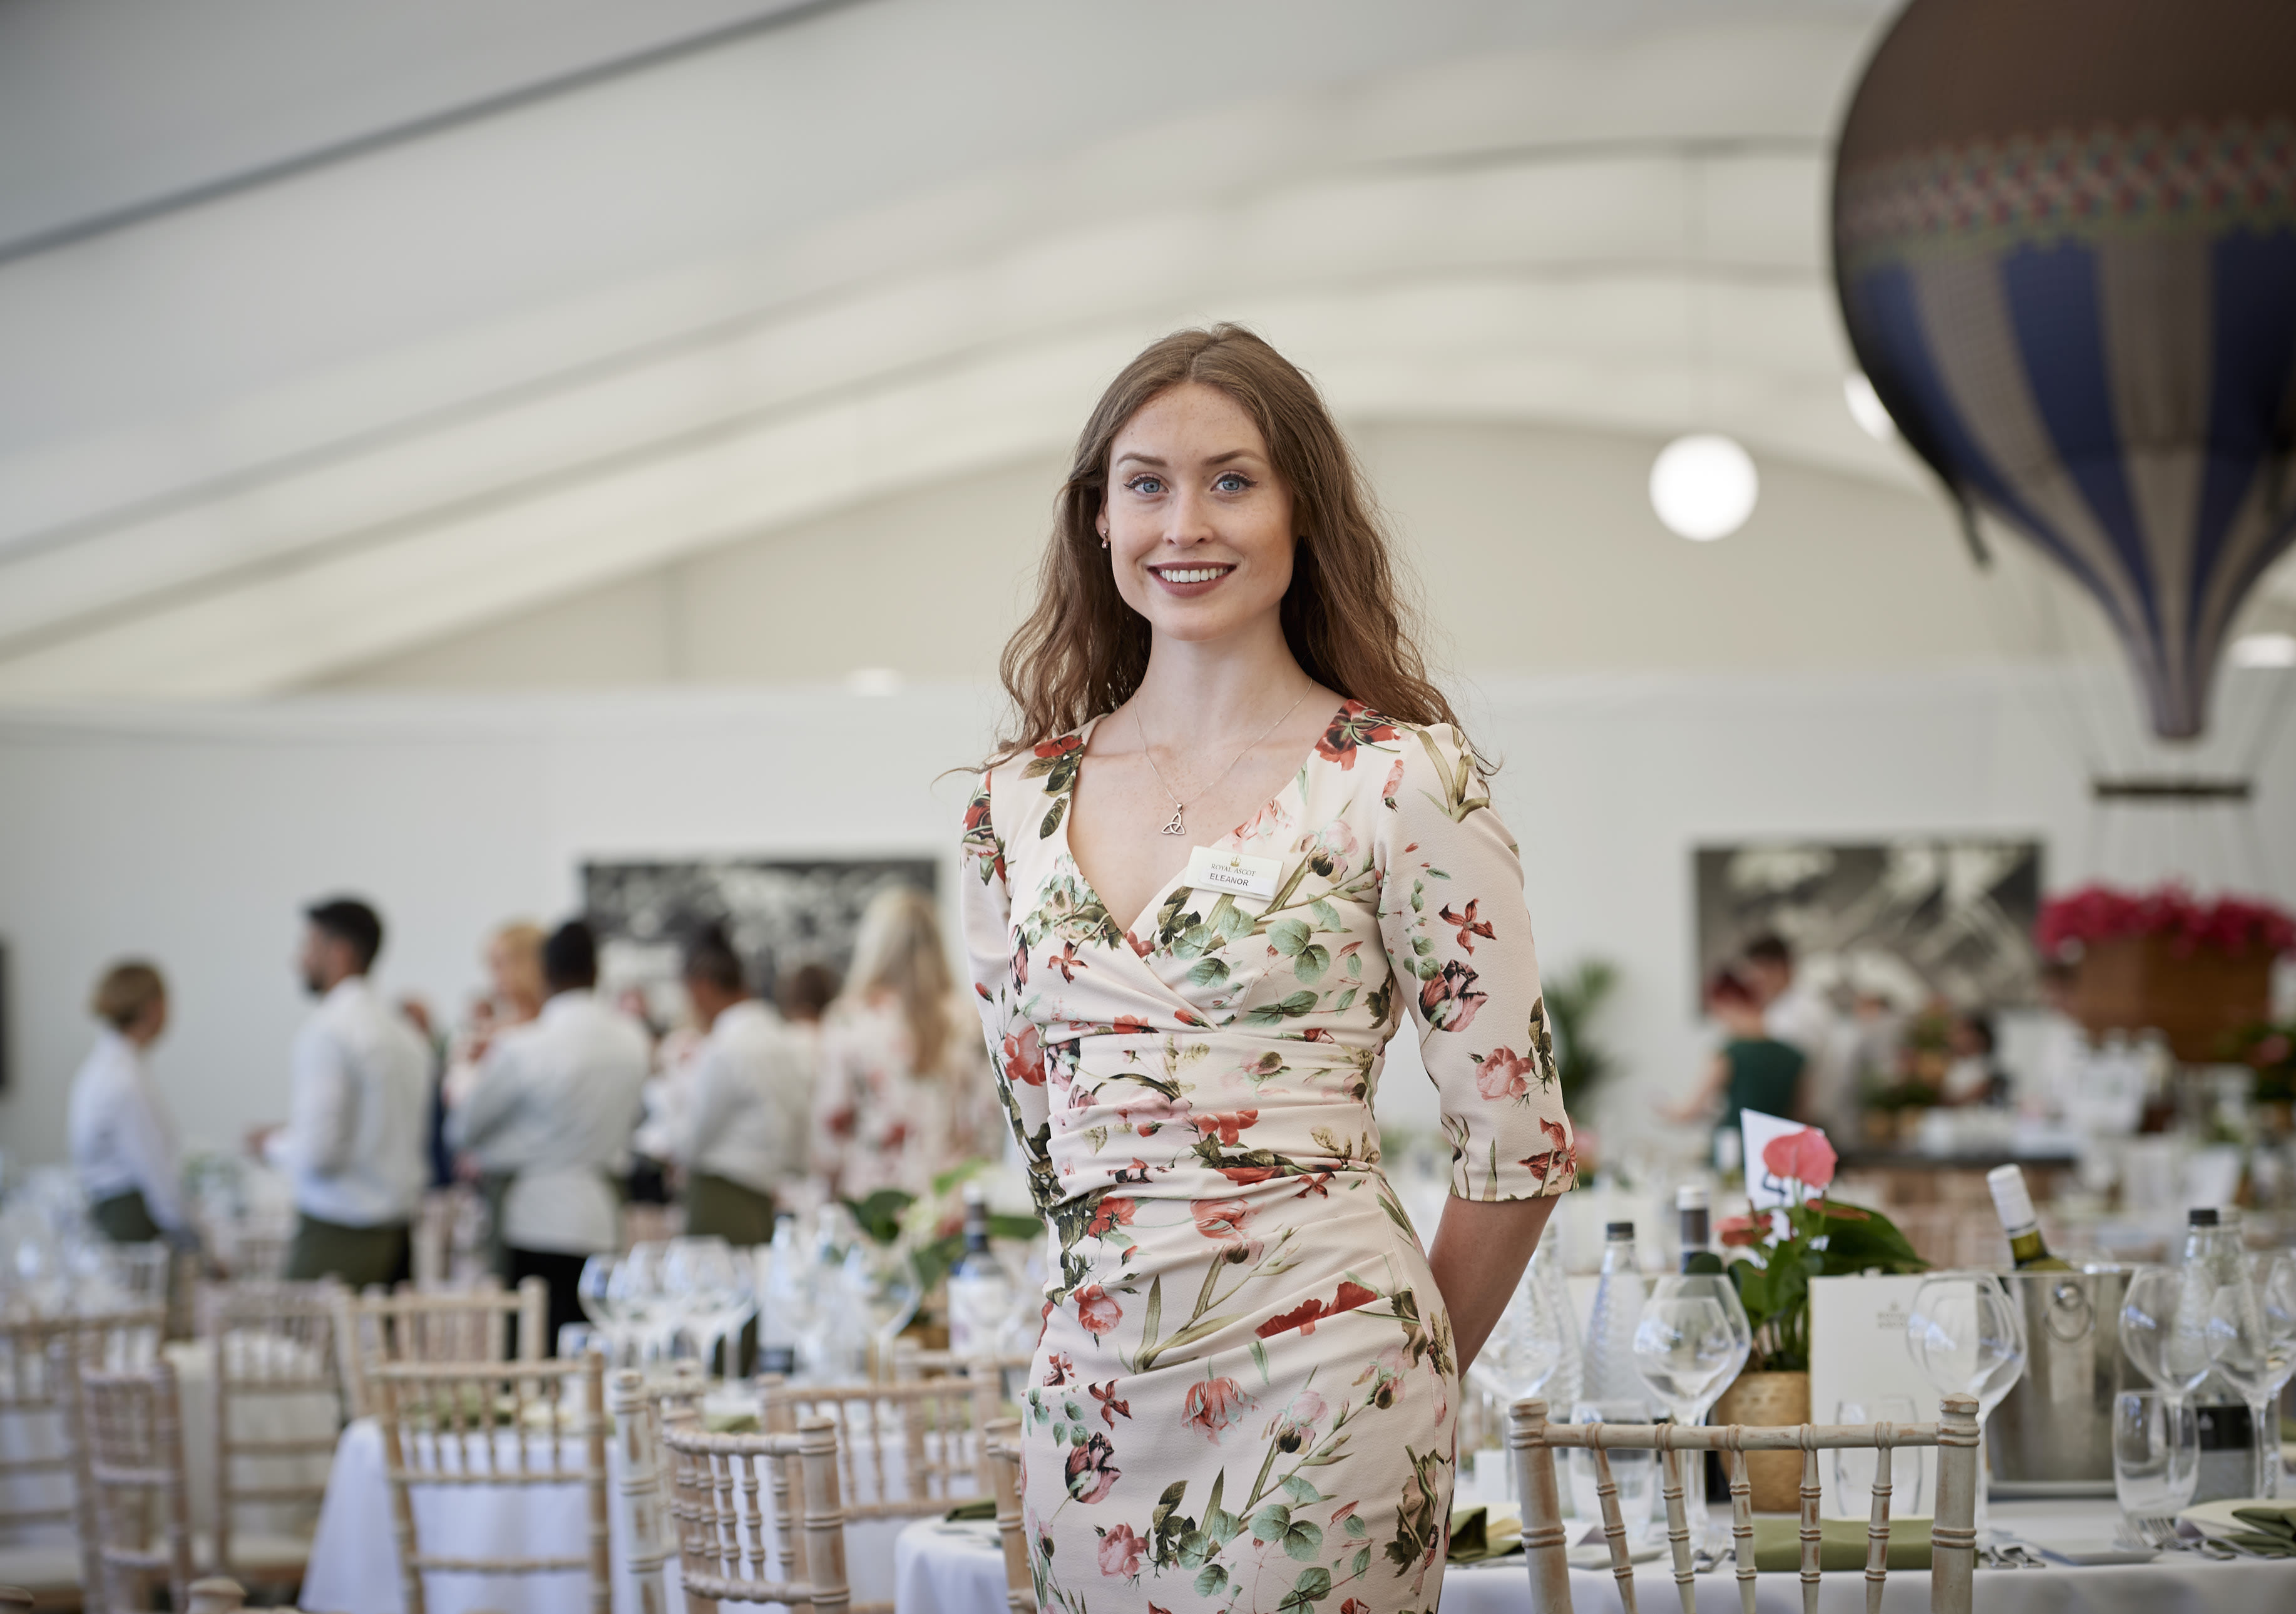 A hostess from Royal Ascot